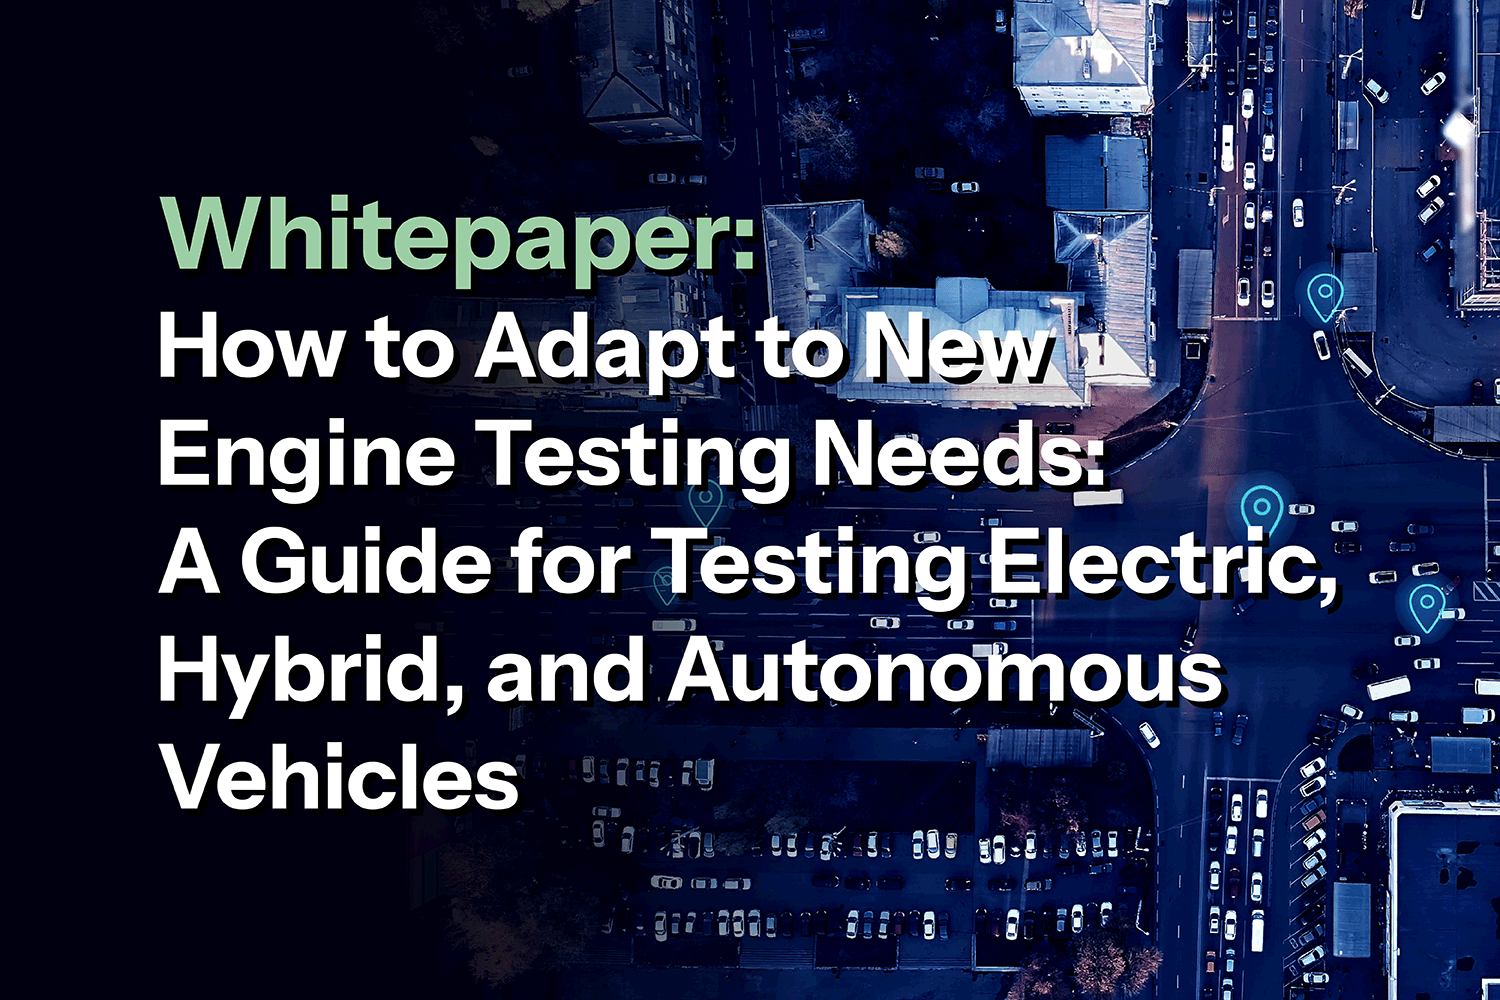 LSS-Knowledge-Center-Whitepaper-How-to-Adapt-to-New-Engine-Testing-Needs(...)-Card-Image-01